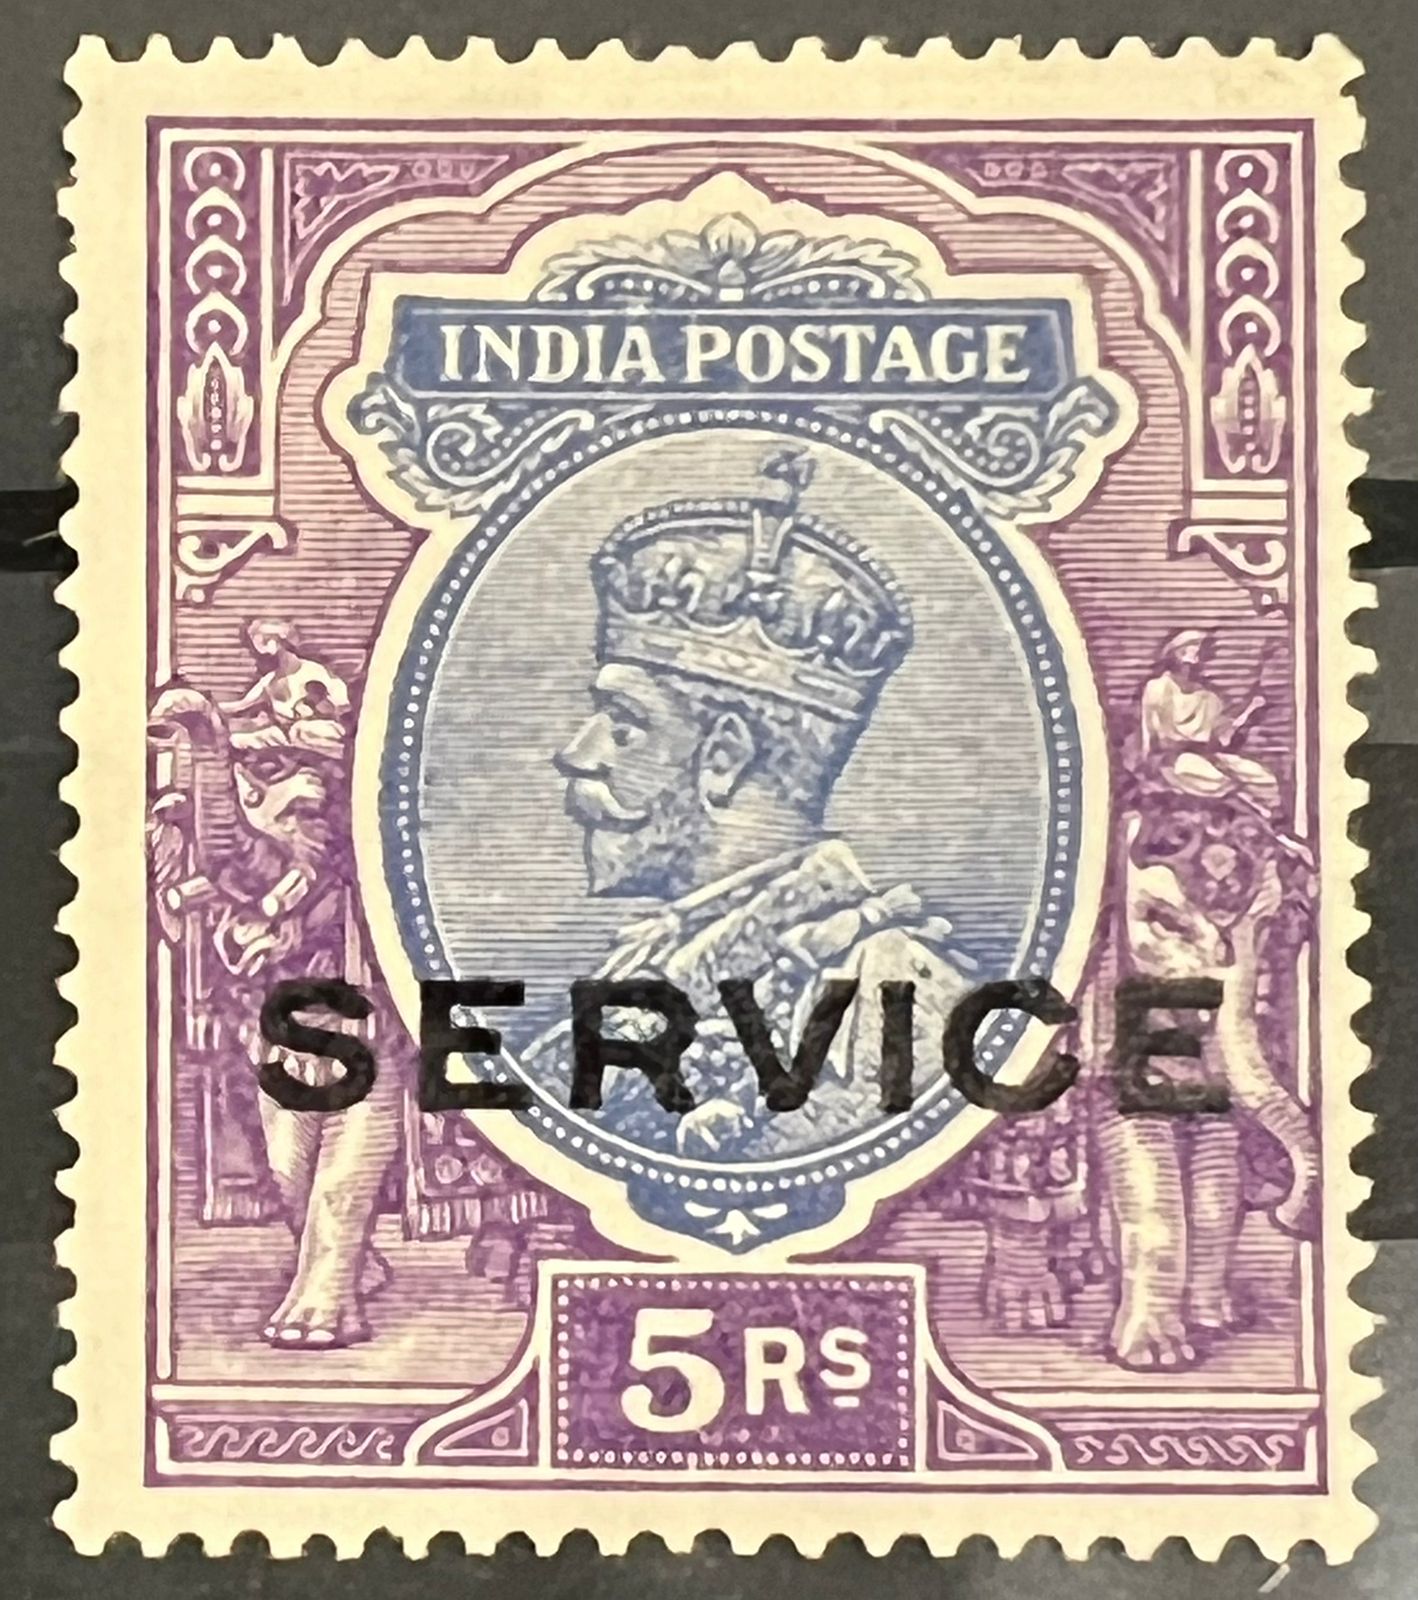 India 1913 KGV Service Single Star Wmk 5Rs ESSAY  " Shiny Ink Overprint " without Gum as issued Rare